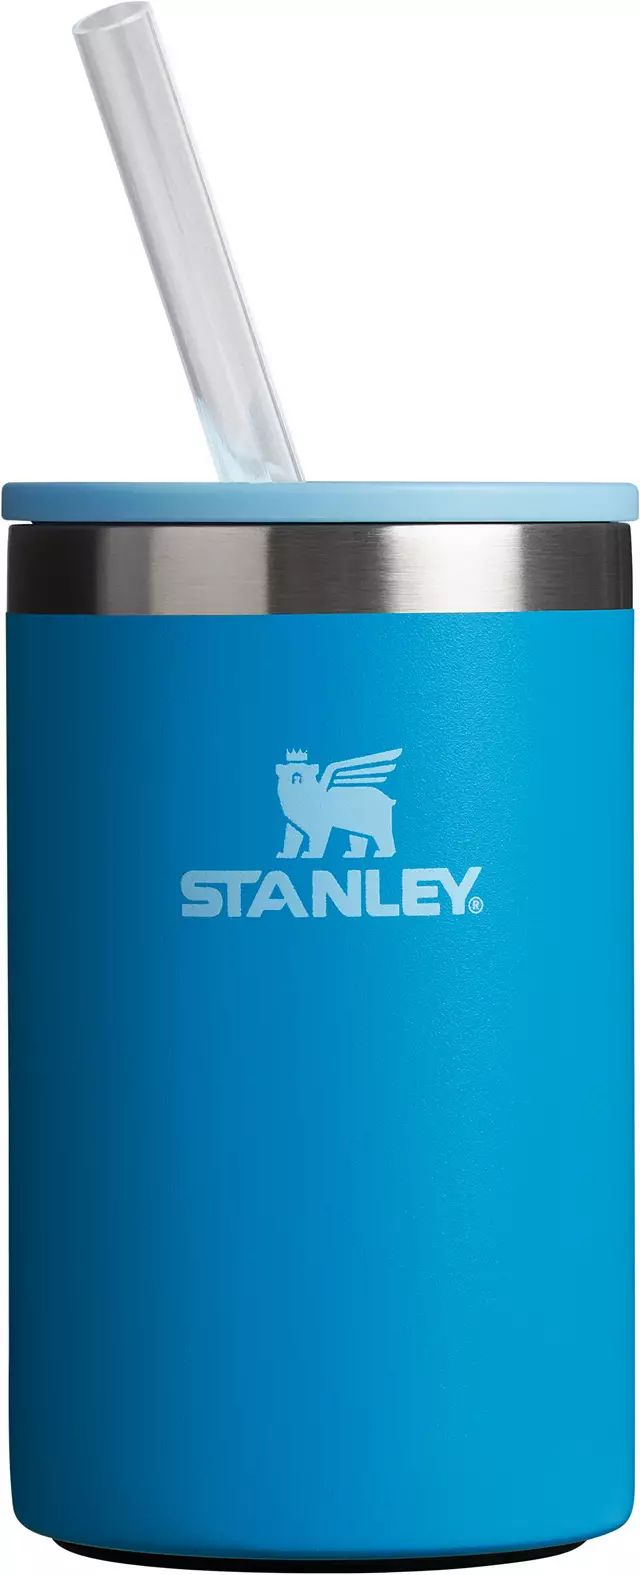 Stanley 10 oz. Everyday Can Cooler Cup | Dick's Sporting Goods | Dick's Sporting Goods